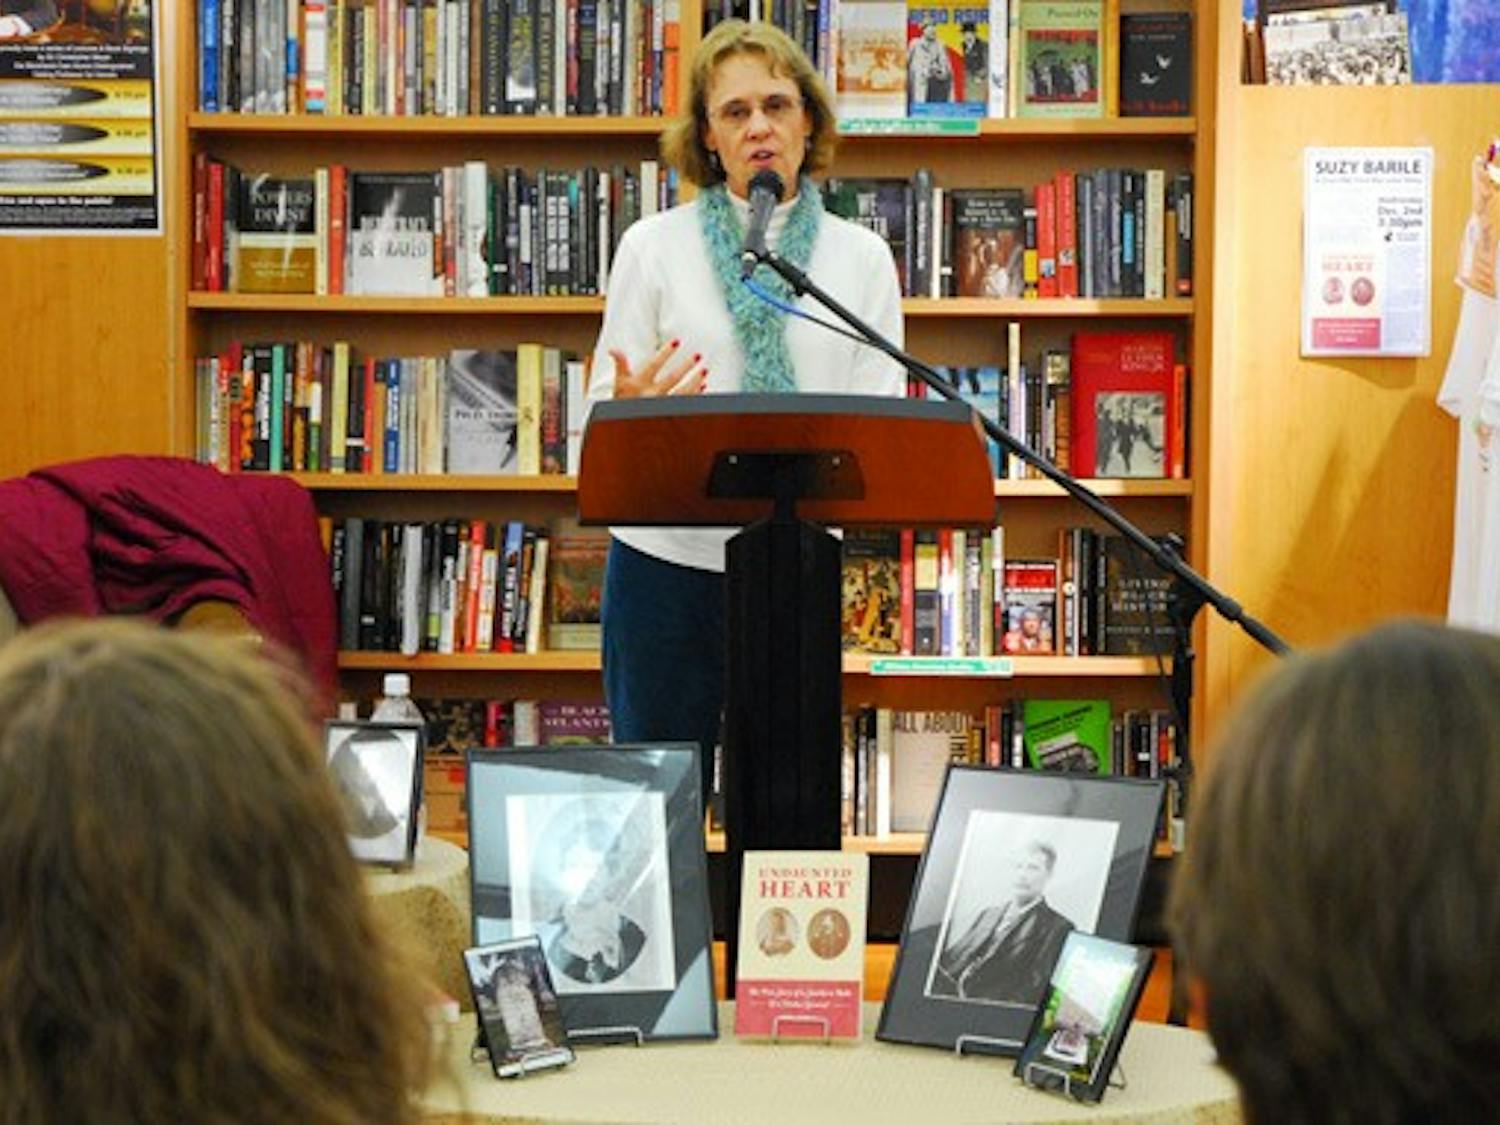 Suzy Barile describes her new book, “Undaunted Heart,” at a reading at Bull’s Head Bookshop on Wednesday. DTH/Lauren Vied